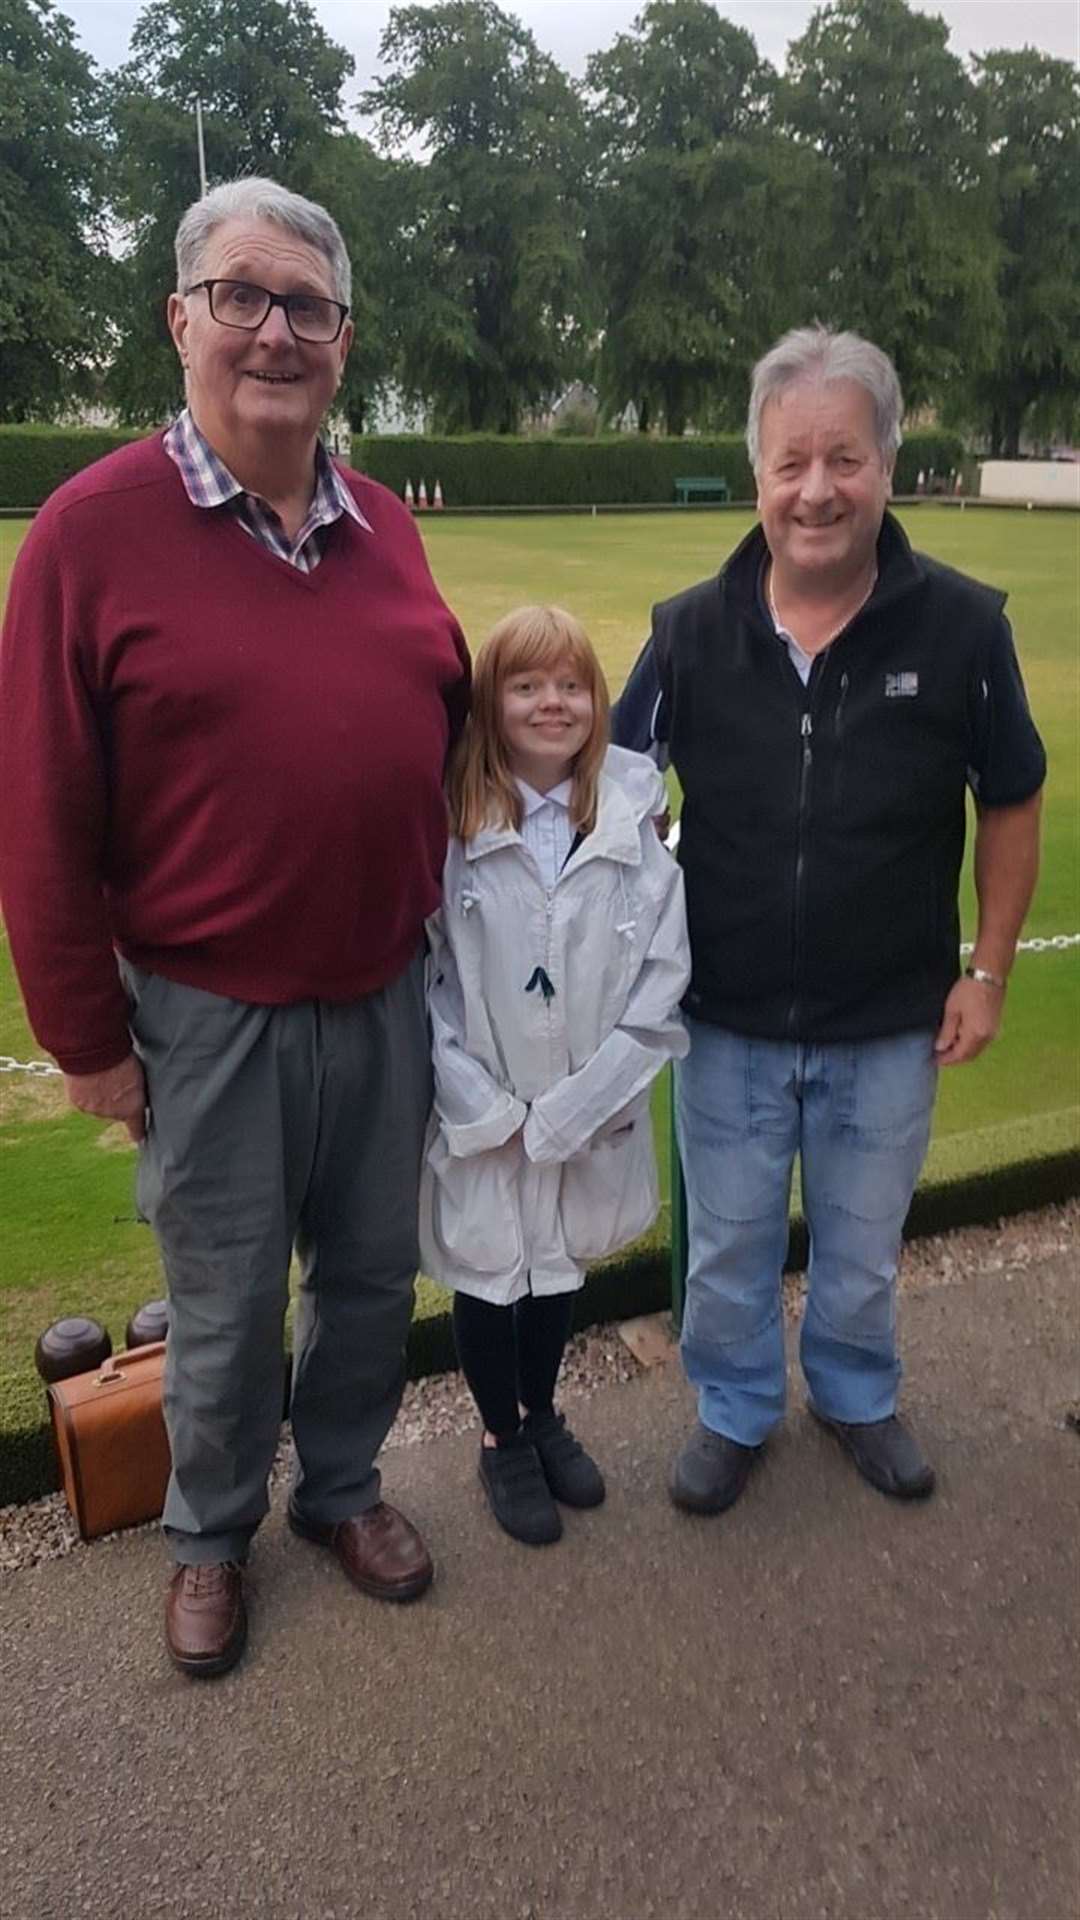 Young Forres bowler Caitlin Dustan with playing partners Derek Crosby and John Ross.